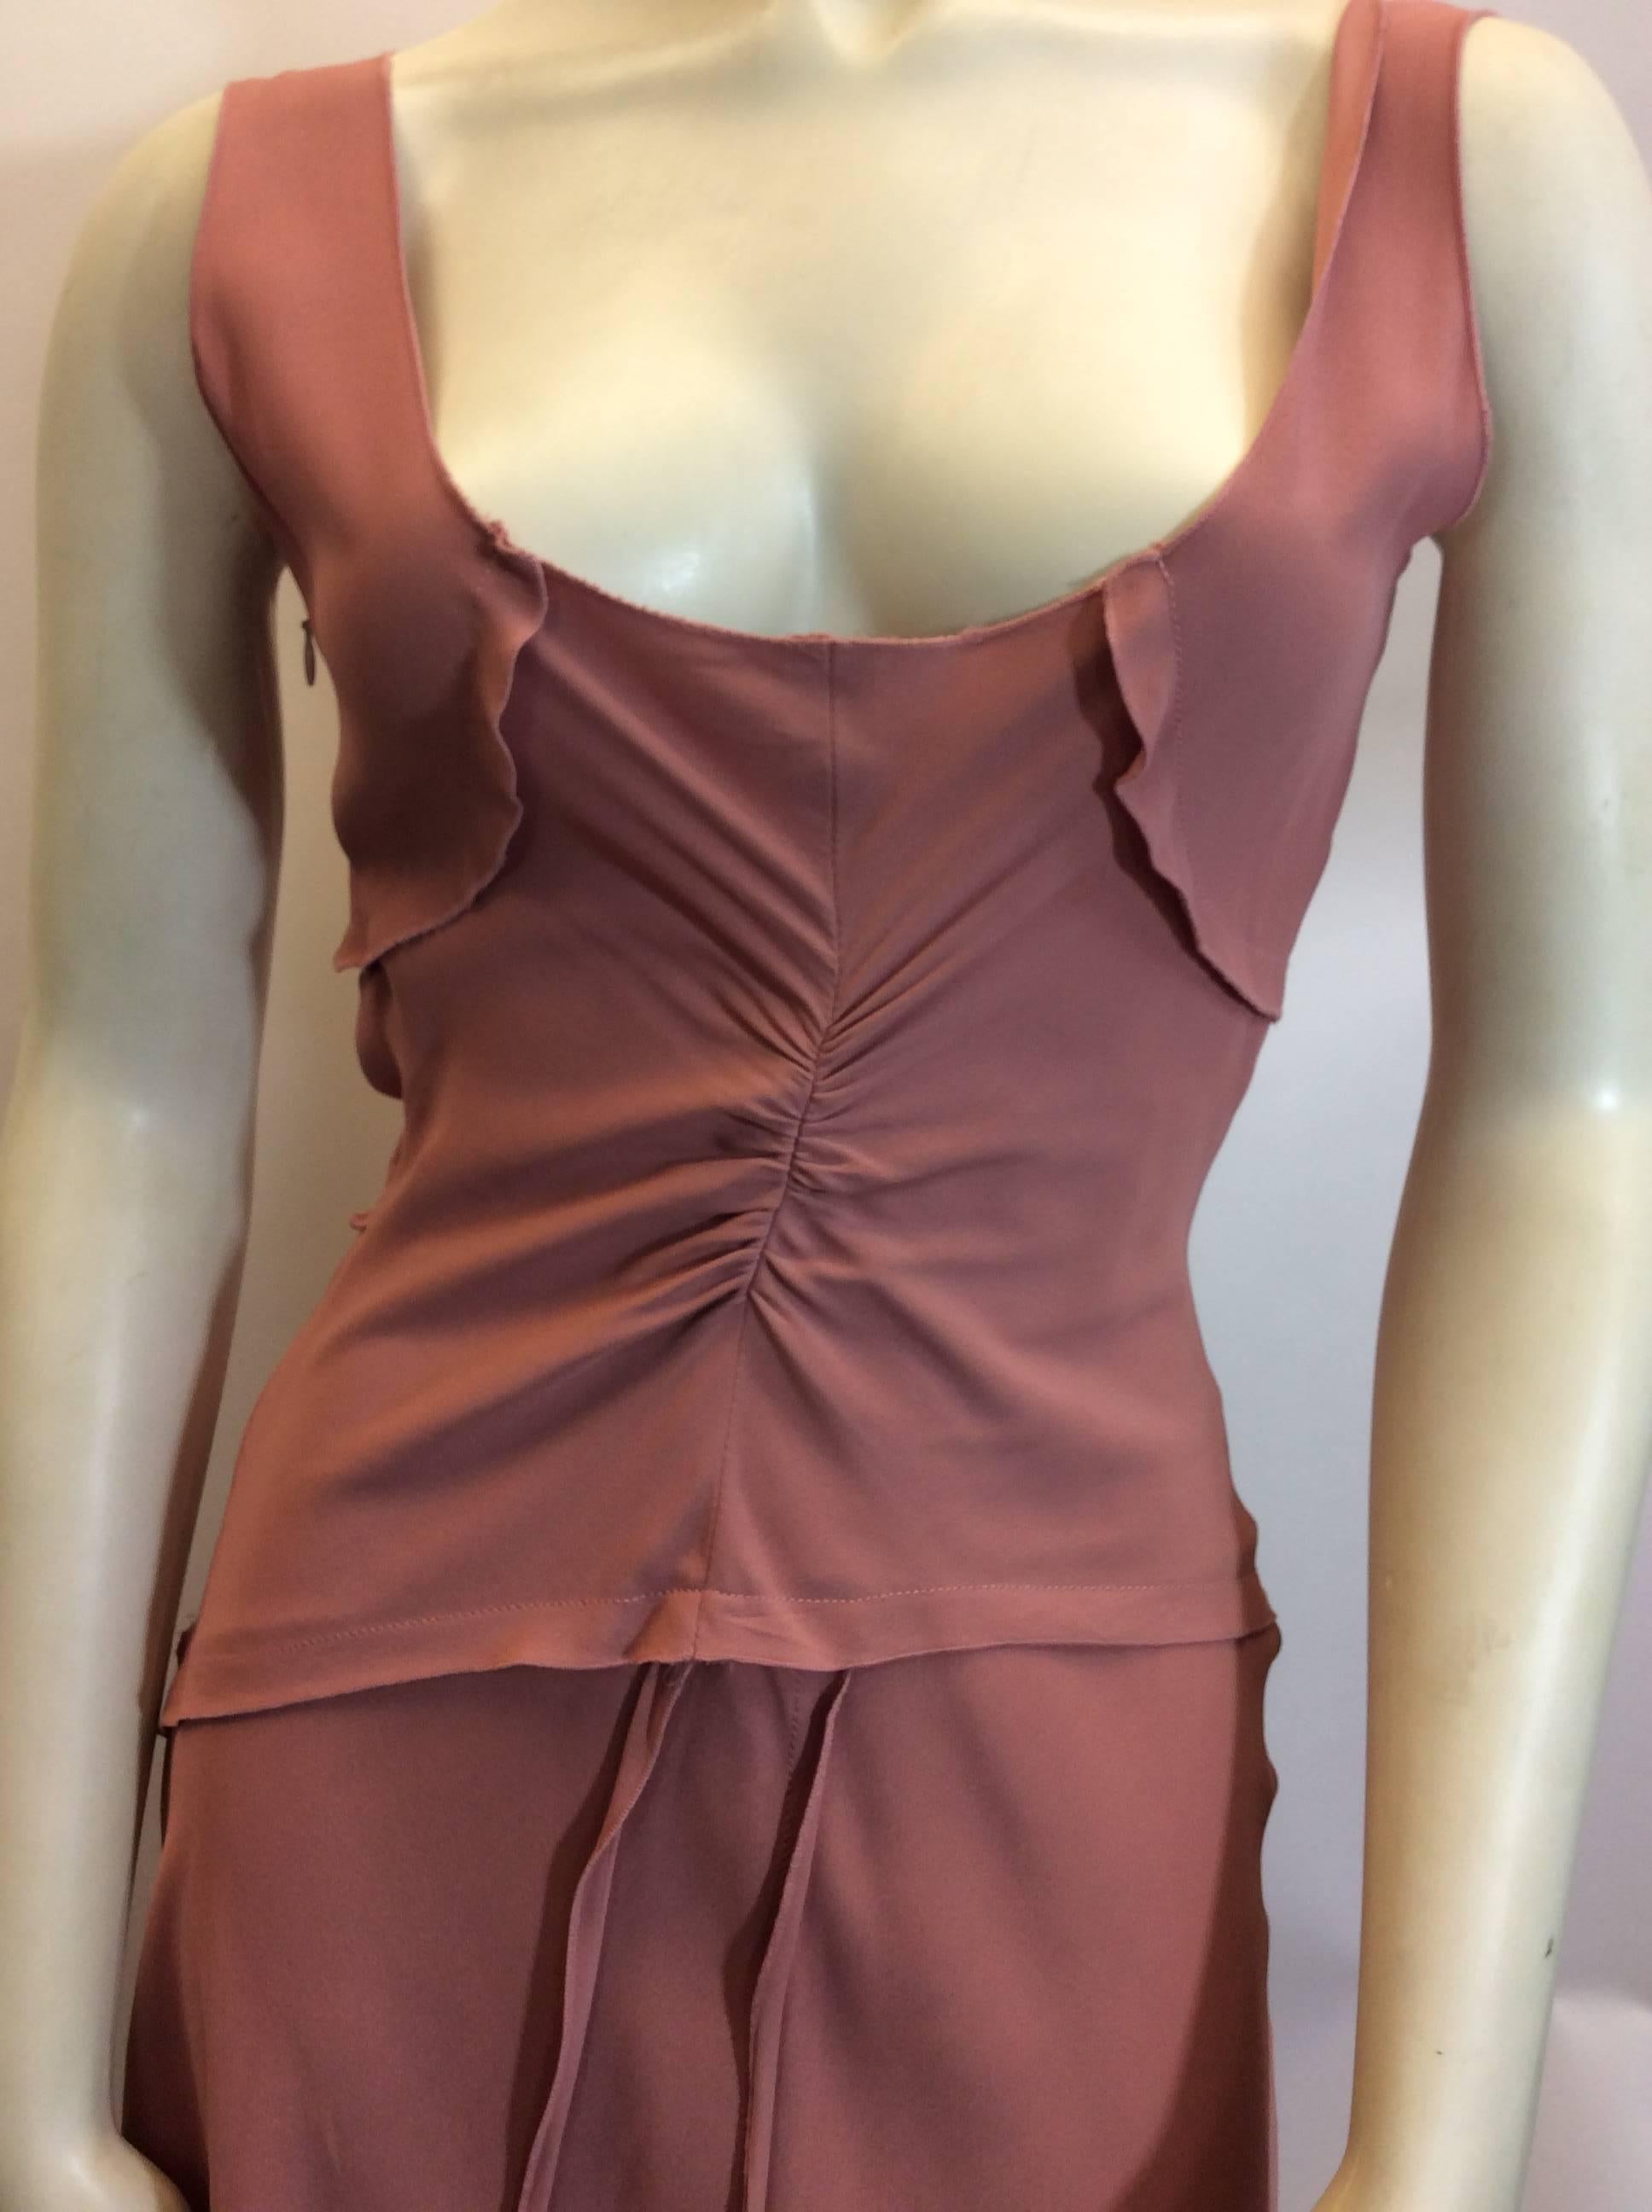 Prada Blush Gathered Dress
Various gathering details
$250
Size x-small
Made in Italy
